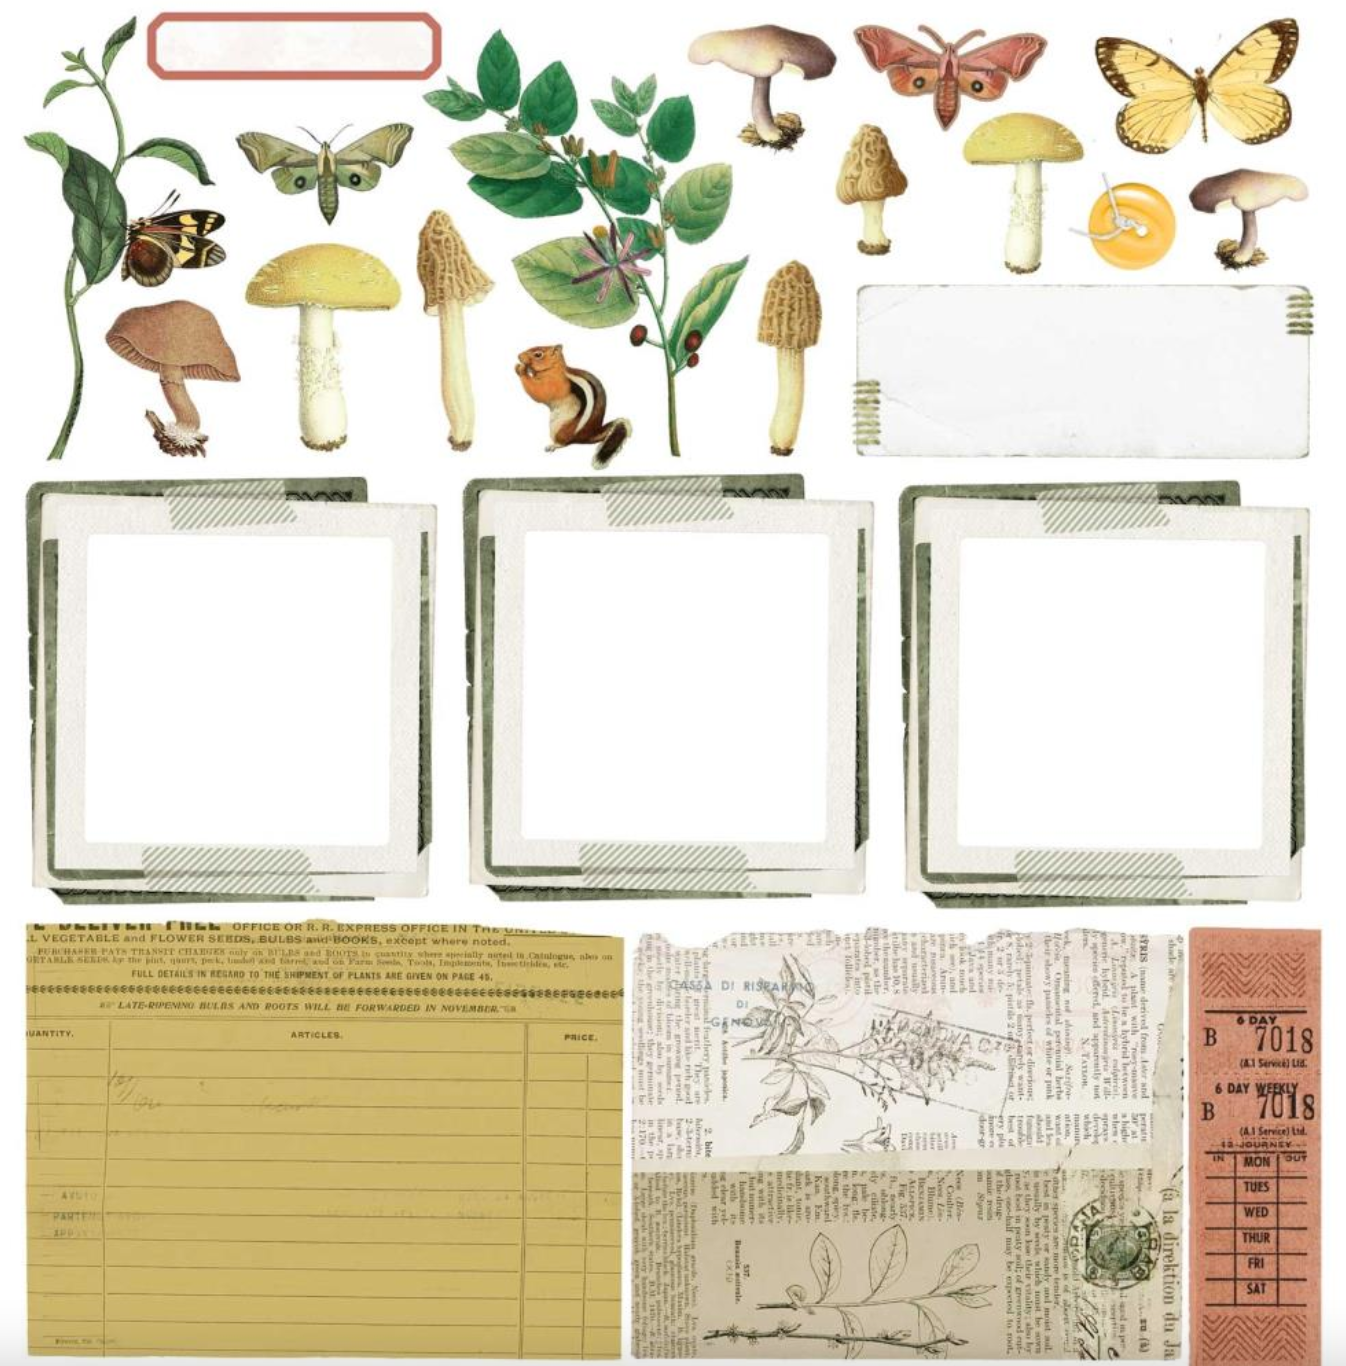 Collection Paper Pack 12 x 12 Inch - Curators Meadow - 49 And Market